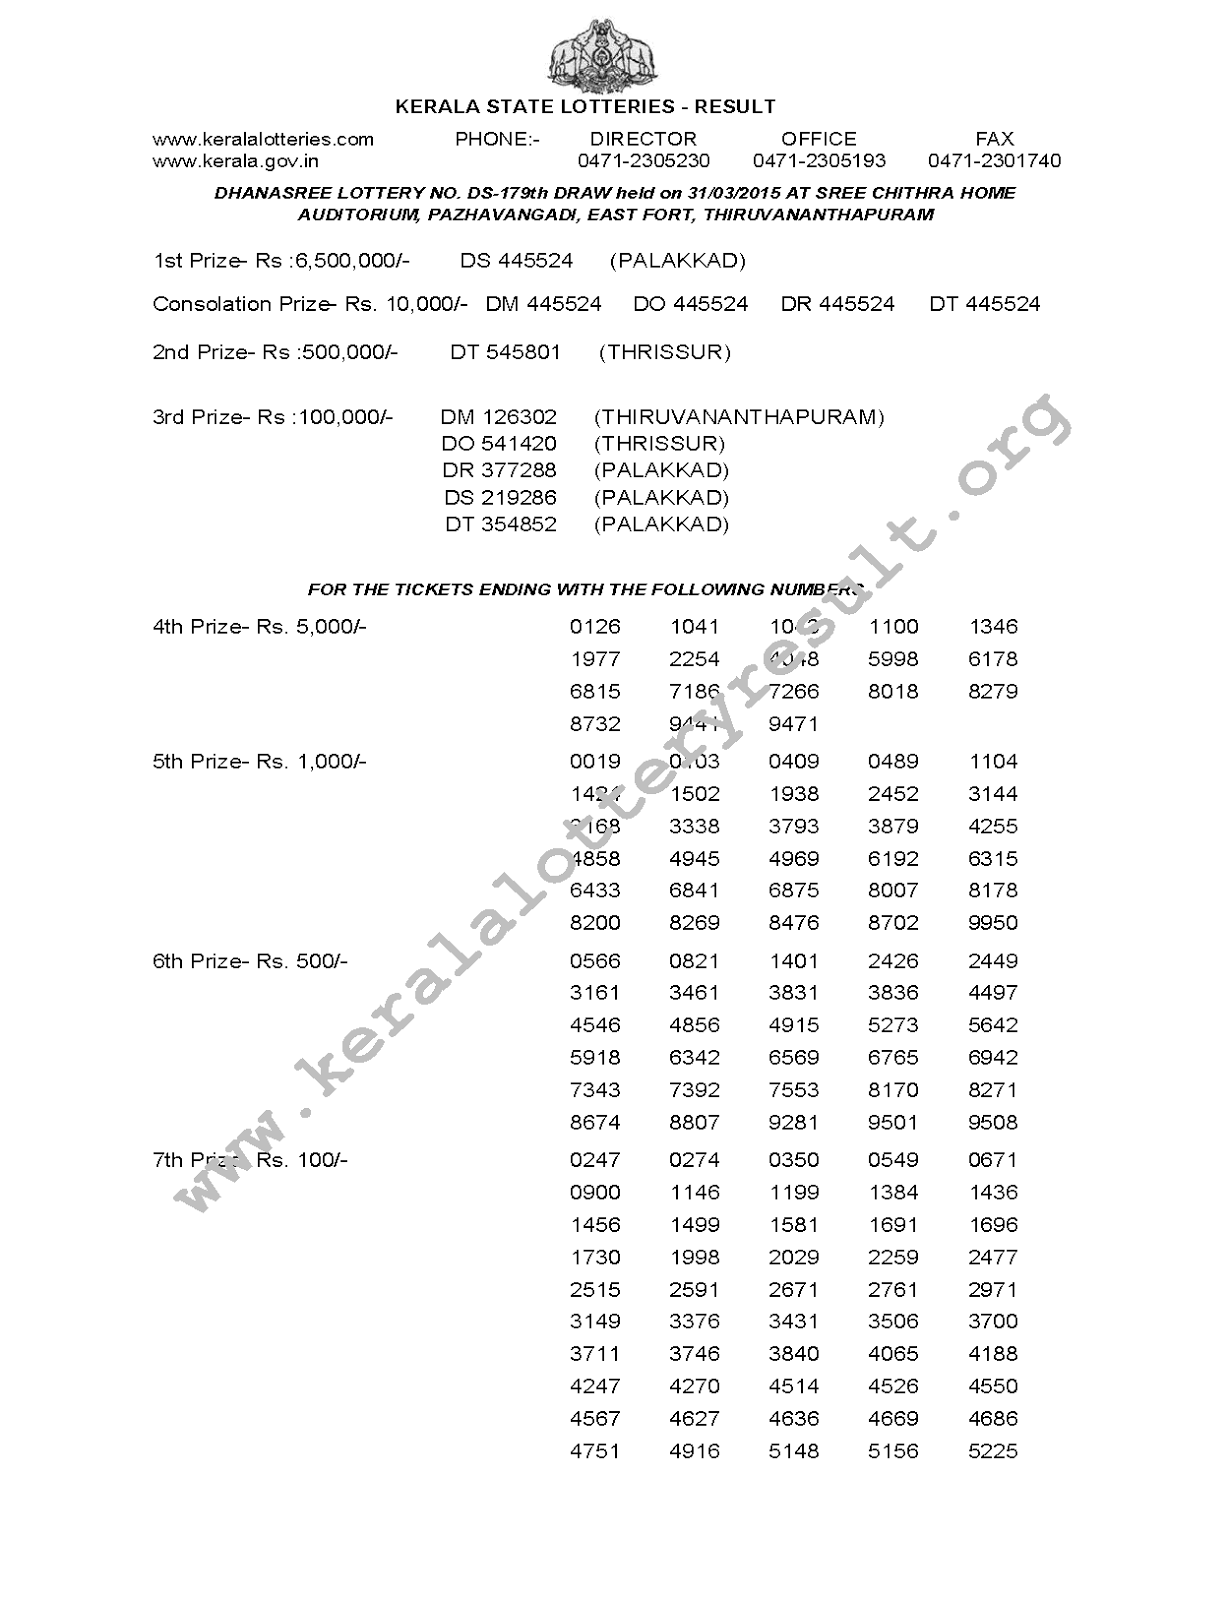 DHANASREE Lottery DS 179 Result 31-3-2015